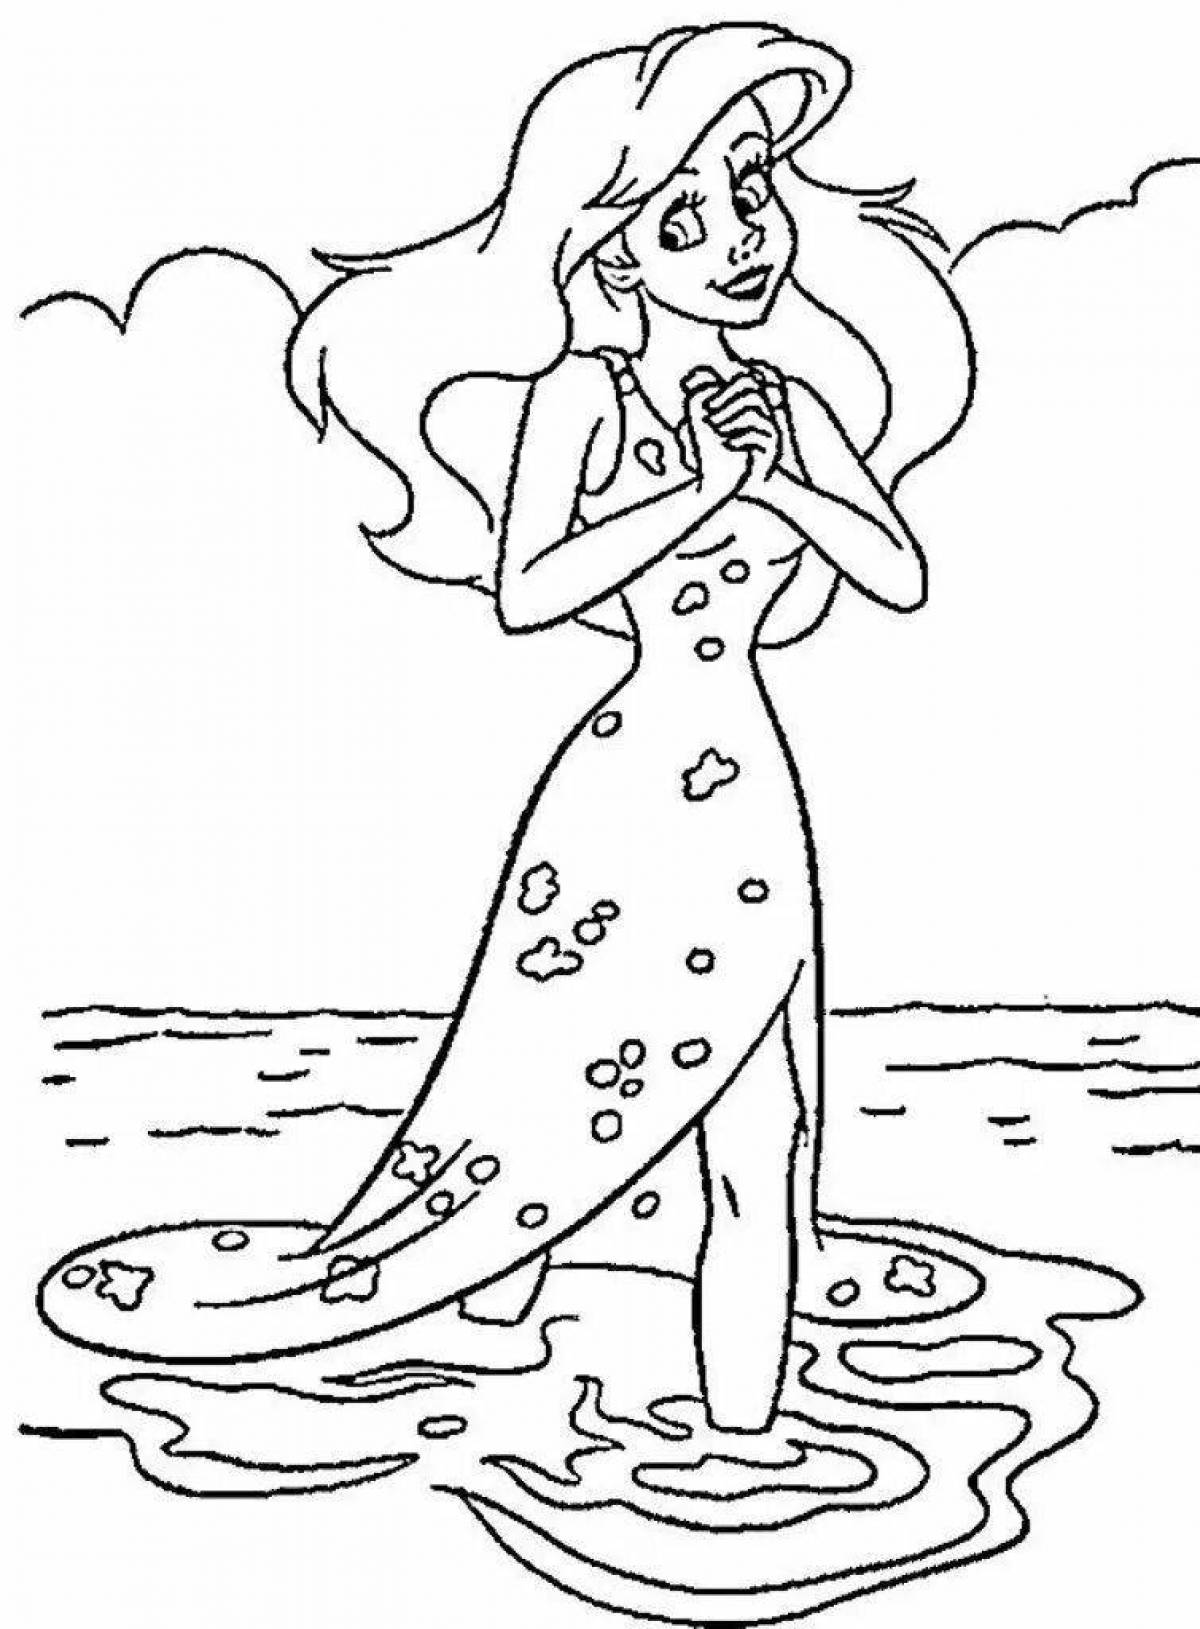 Amazing little mermaid coloring book for kids 4-5 years old